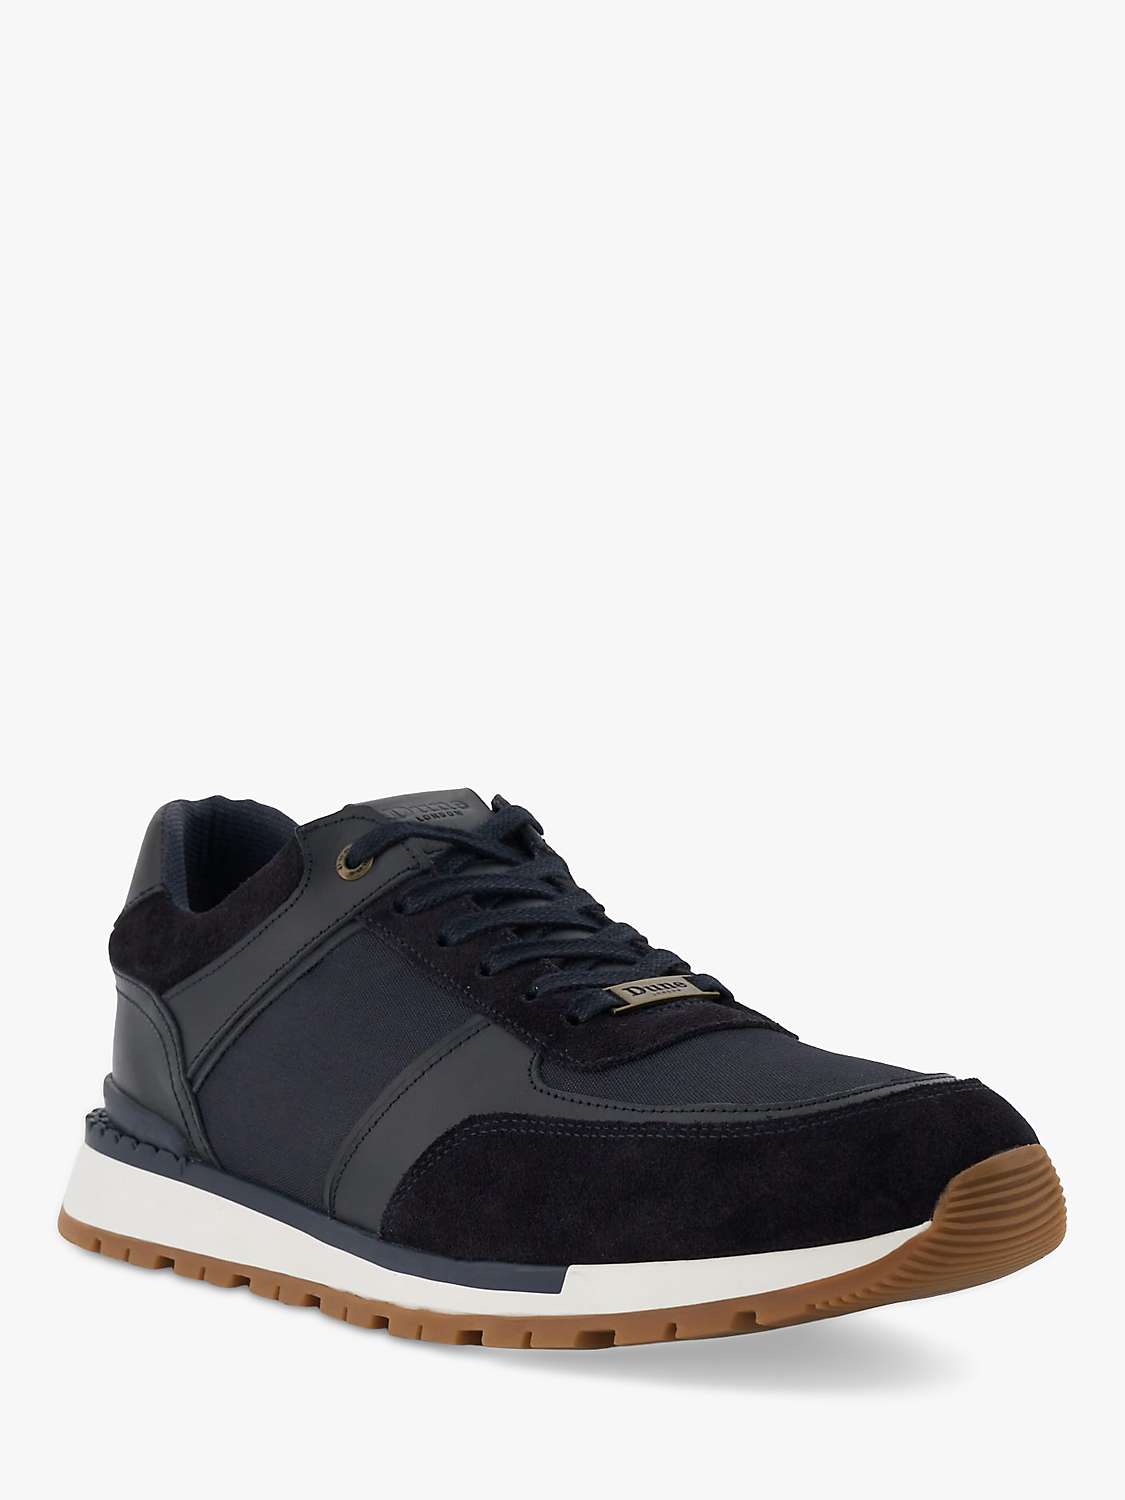 Buy Dune Titles Suede and Leather Trainers Online at johnlewis.com